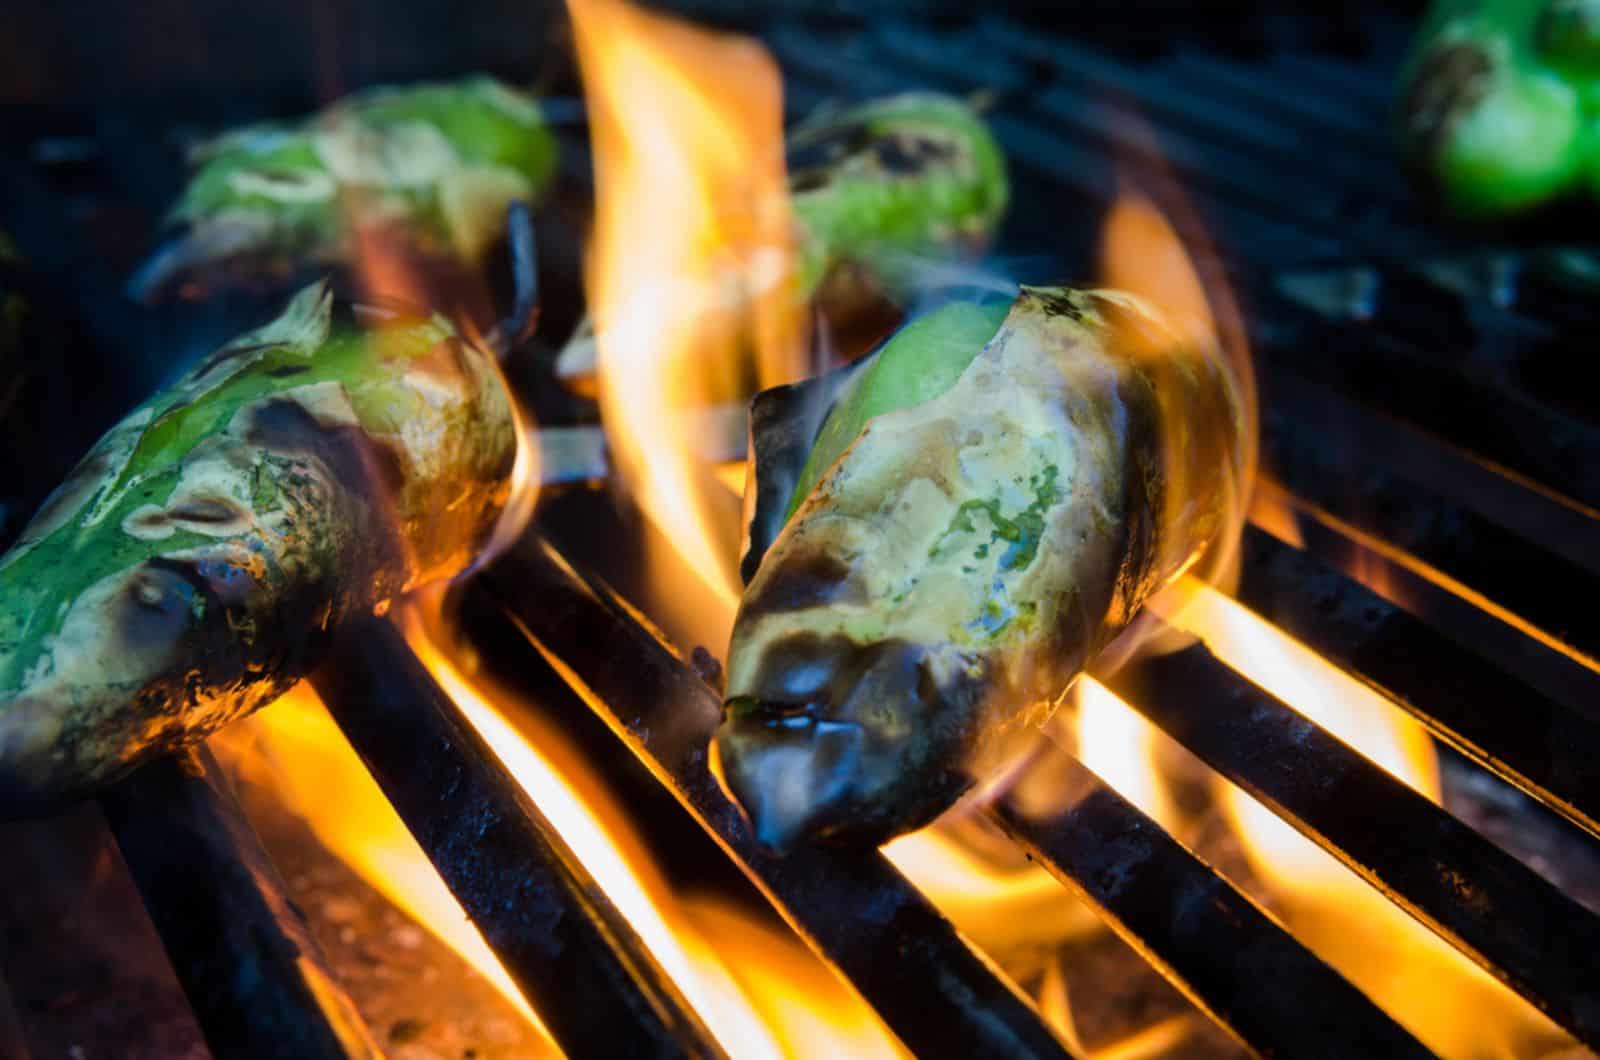 Small green peppers roast on flames on a grill